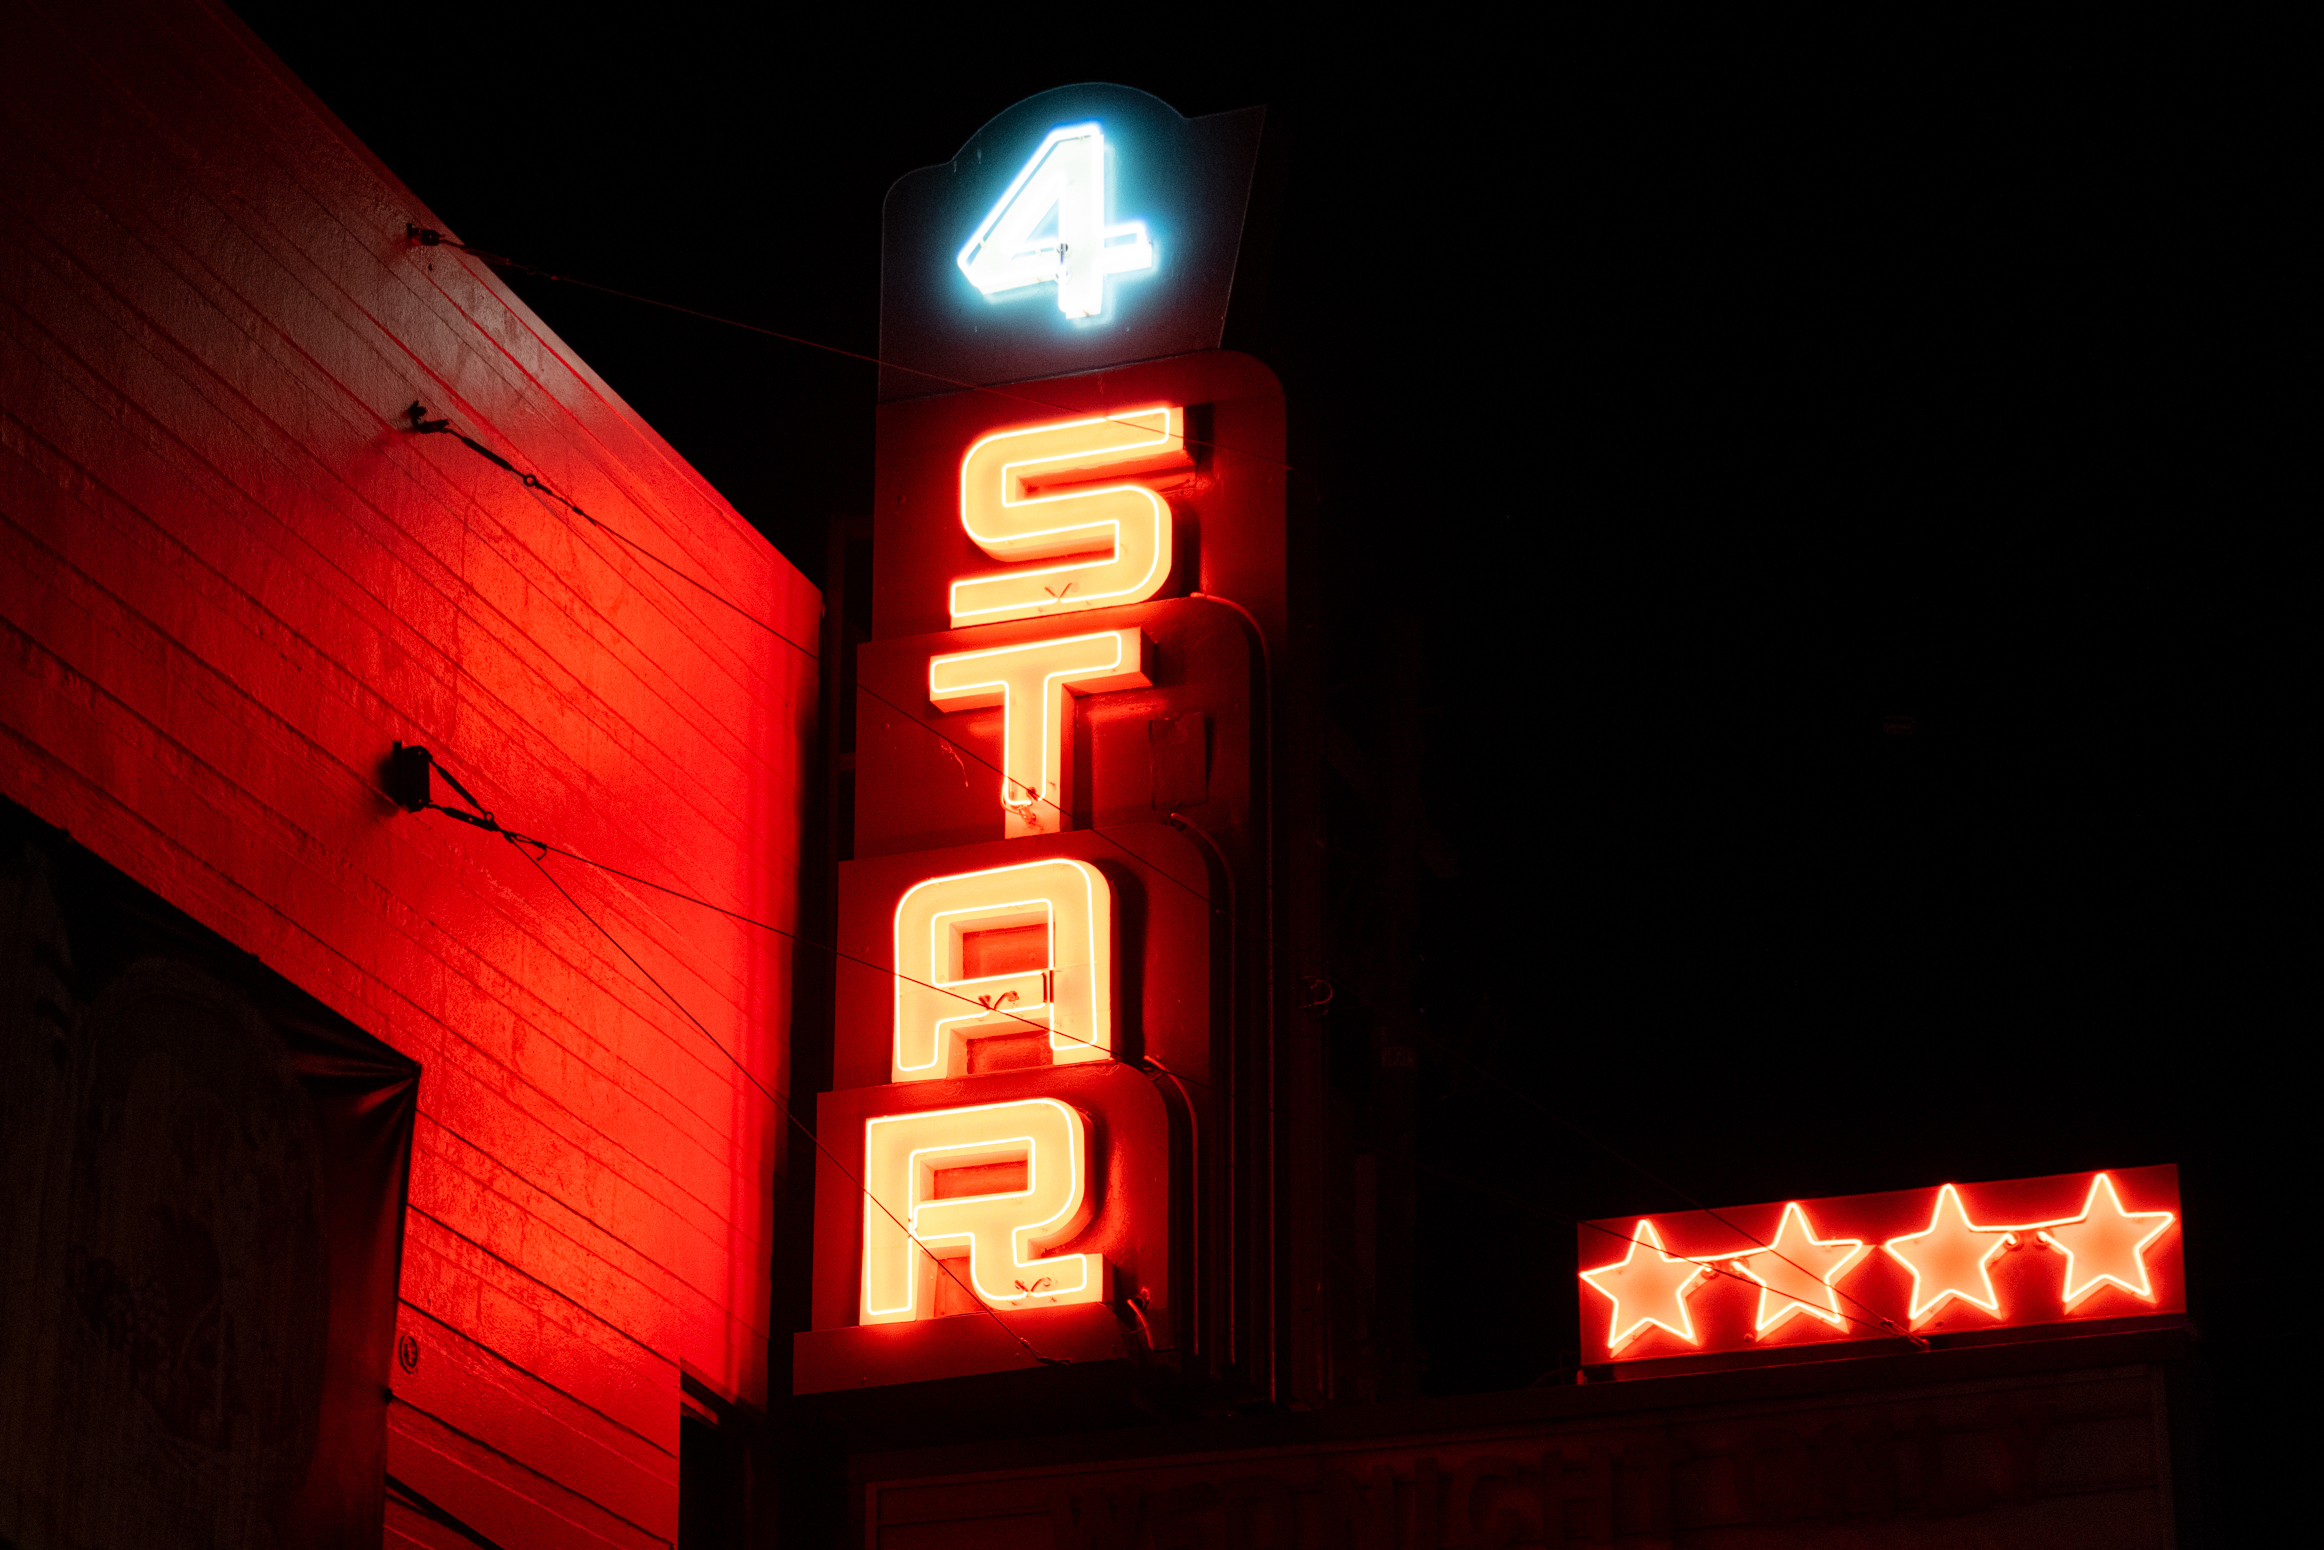 A neon sign at night with the words &quot;4 STAR&quot;